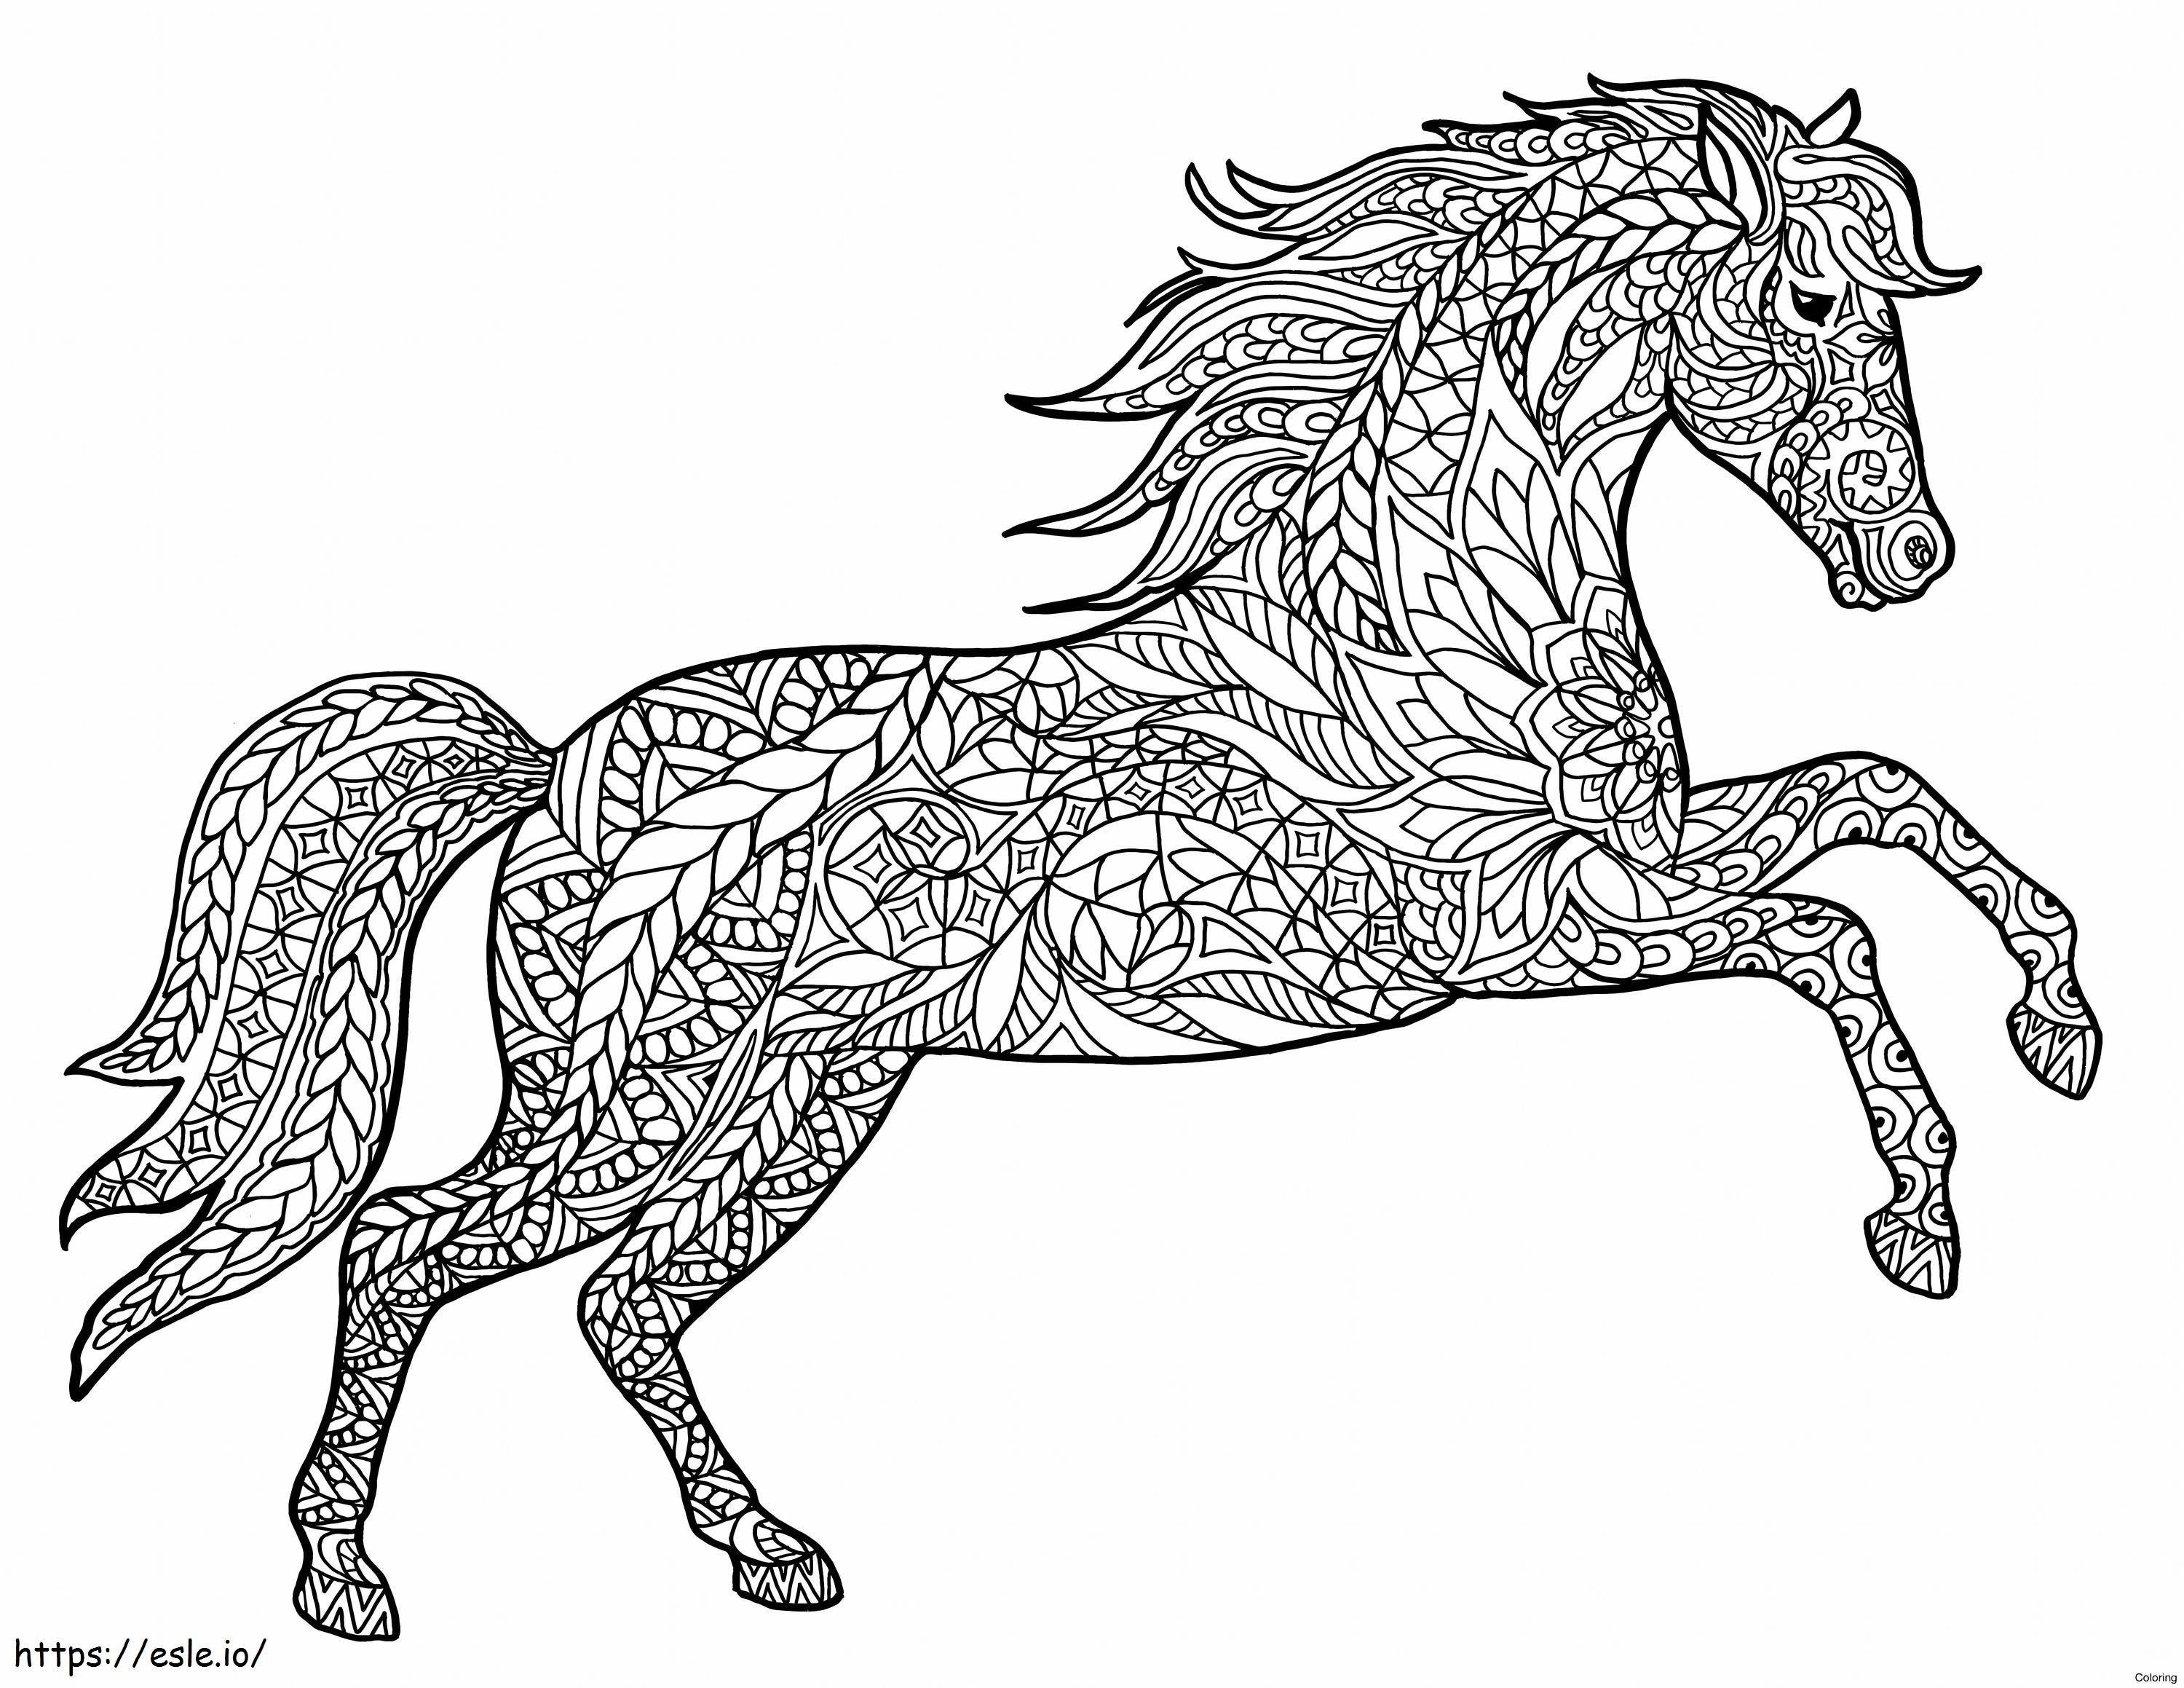 1541811334 Daring Horse For Adults Adult Page Gift Wall Art Mandala By Scaled 2 coloring page